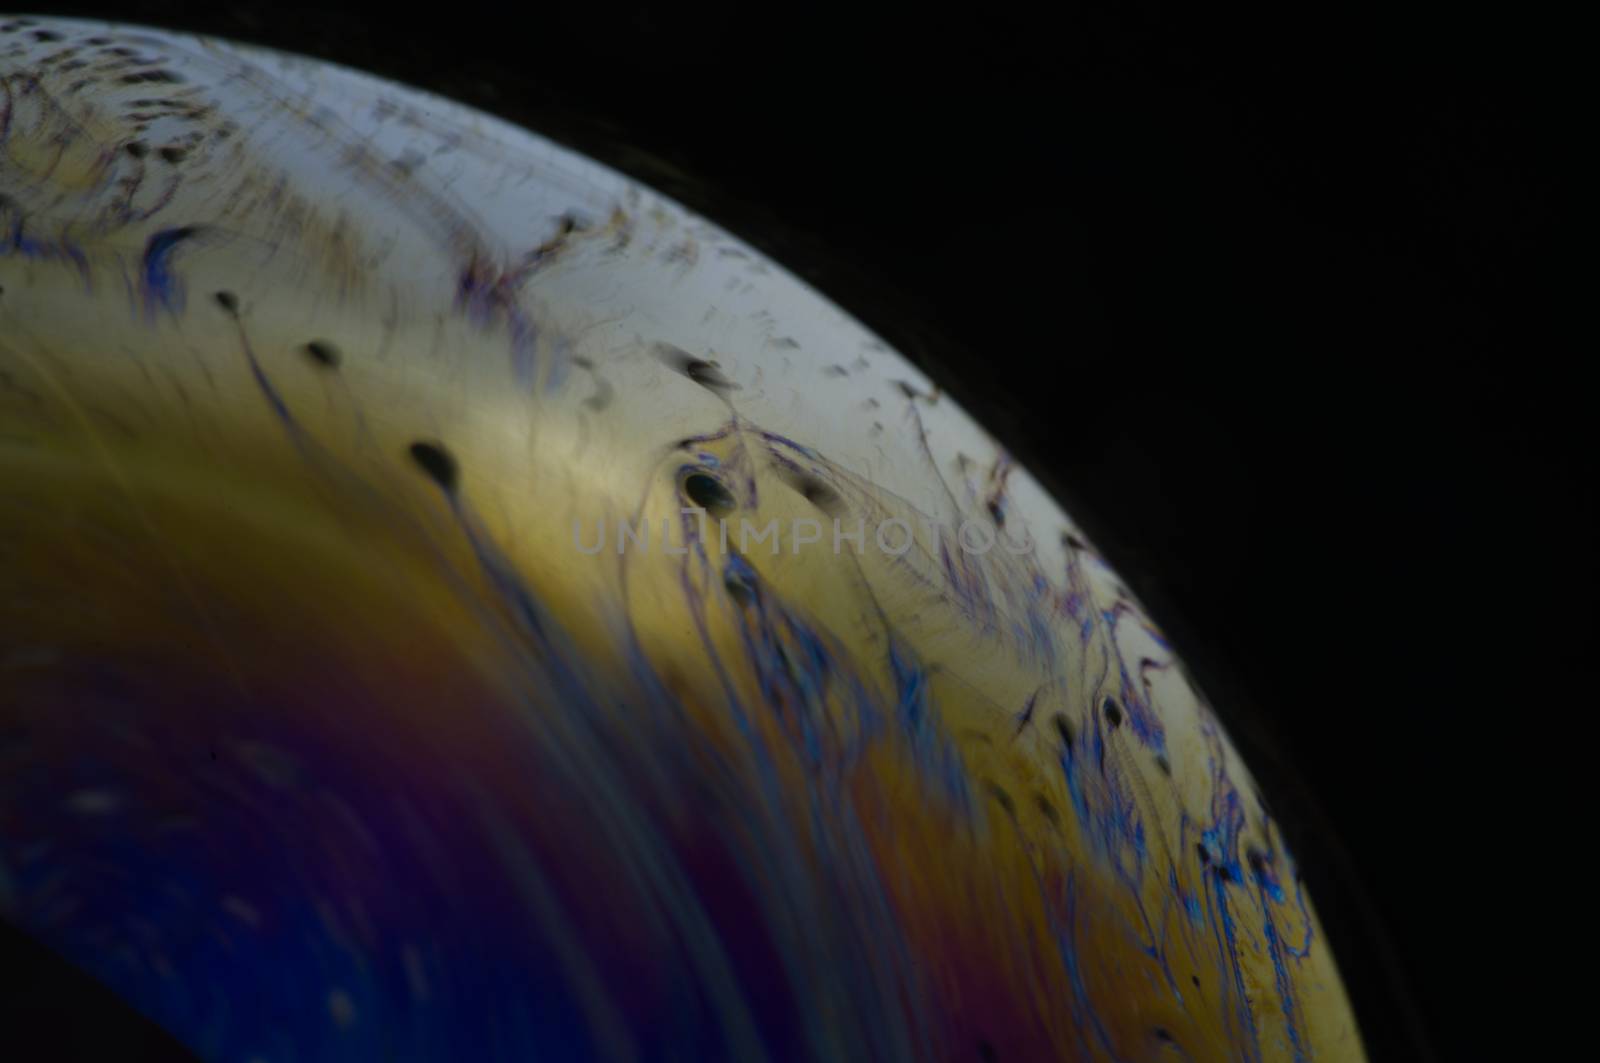 Structure texture soap bubble abstract black background. by noppha80